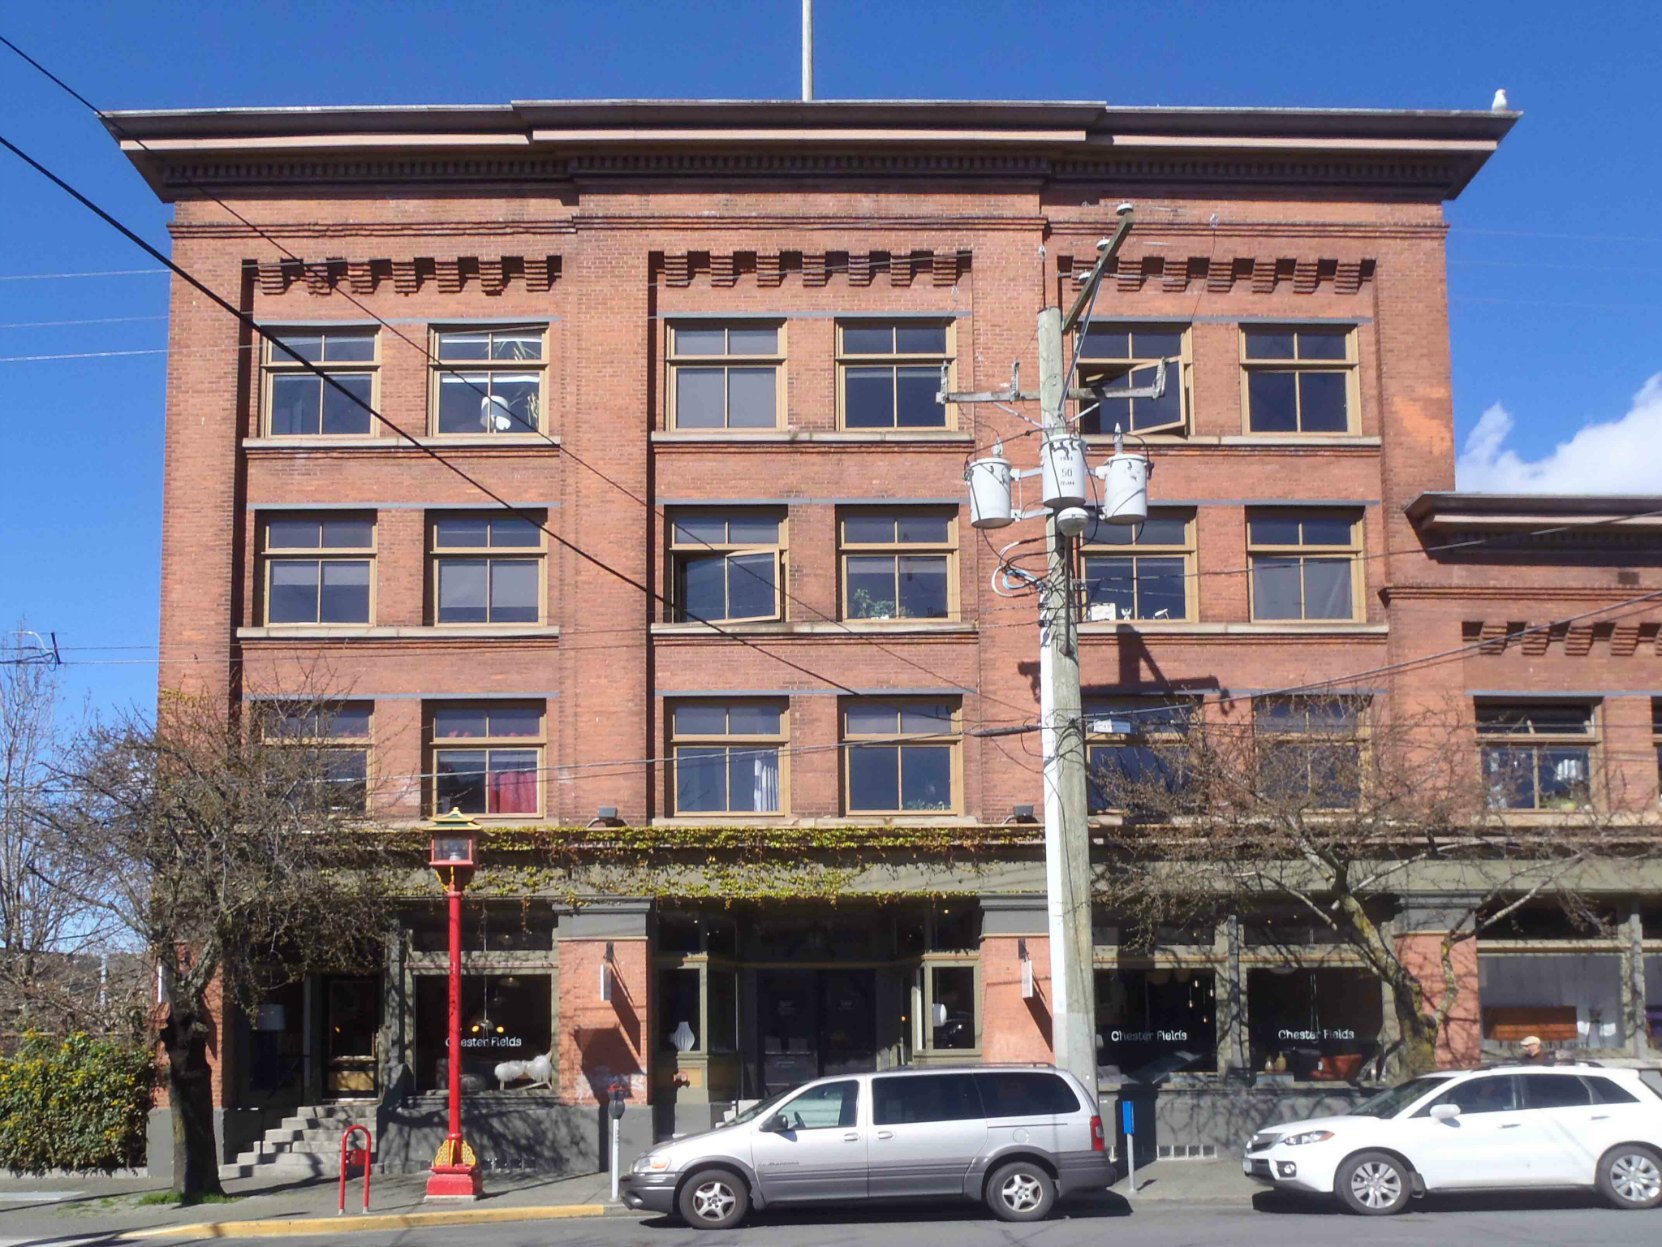 532 Herald Street, built in 1908-1909 as a warehouse for Wilson Brothers. It is now a condominium development known as "The Biggerstaff" after Biggerstaff Wilson.